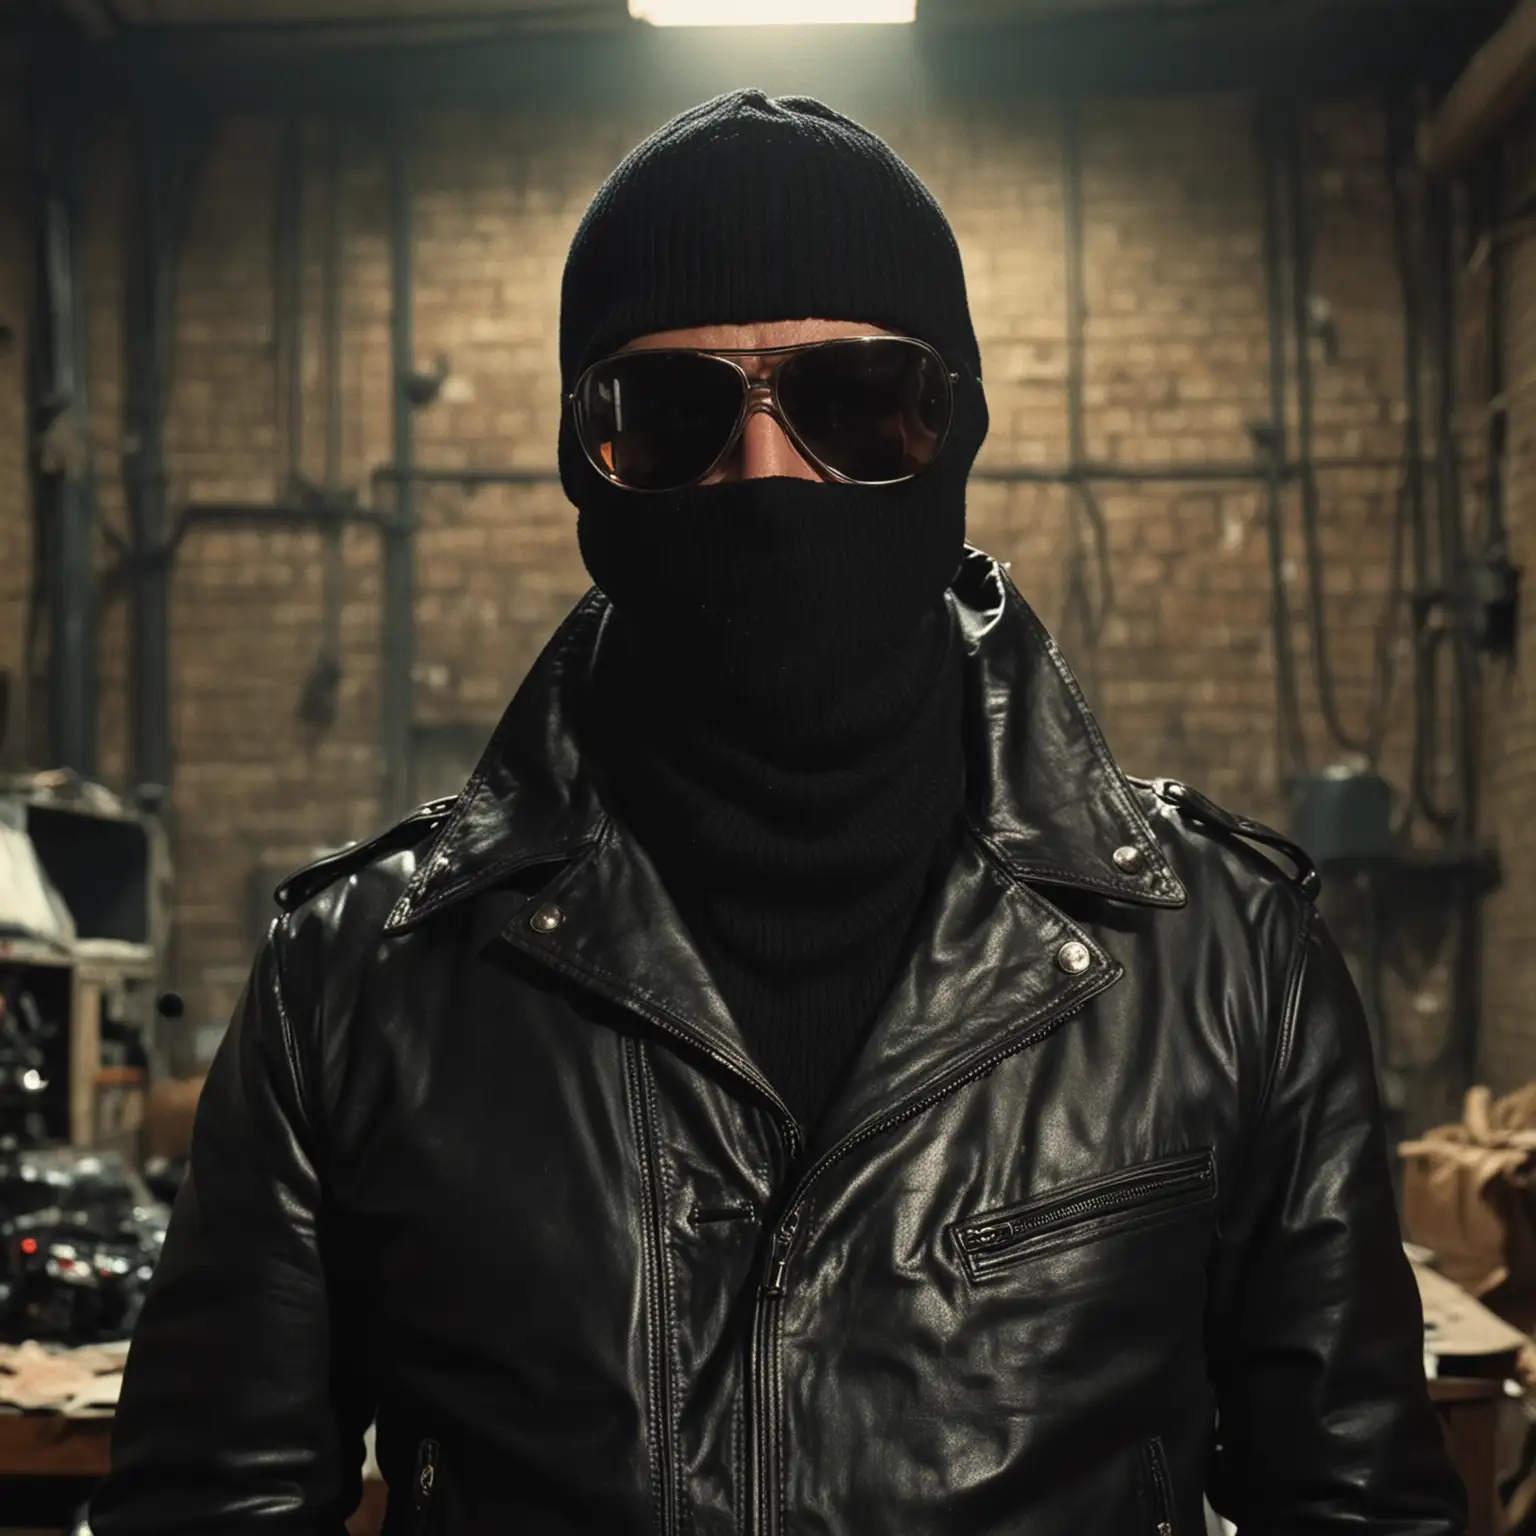 private detective, angry, balaclava, sunglasses, leather jacket, 70s crime film,  dark warehouse, Super Panavision 70, gun pointed at screen